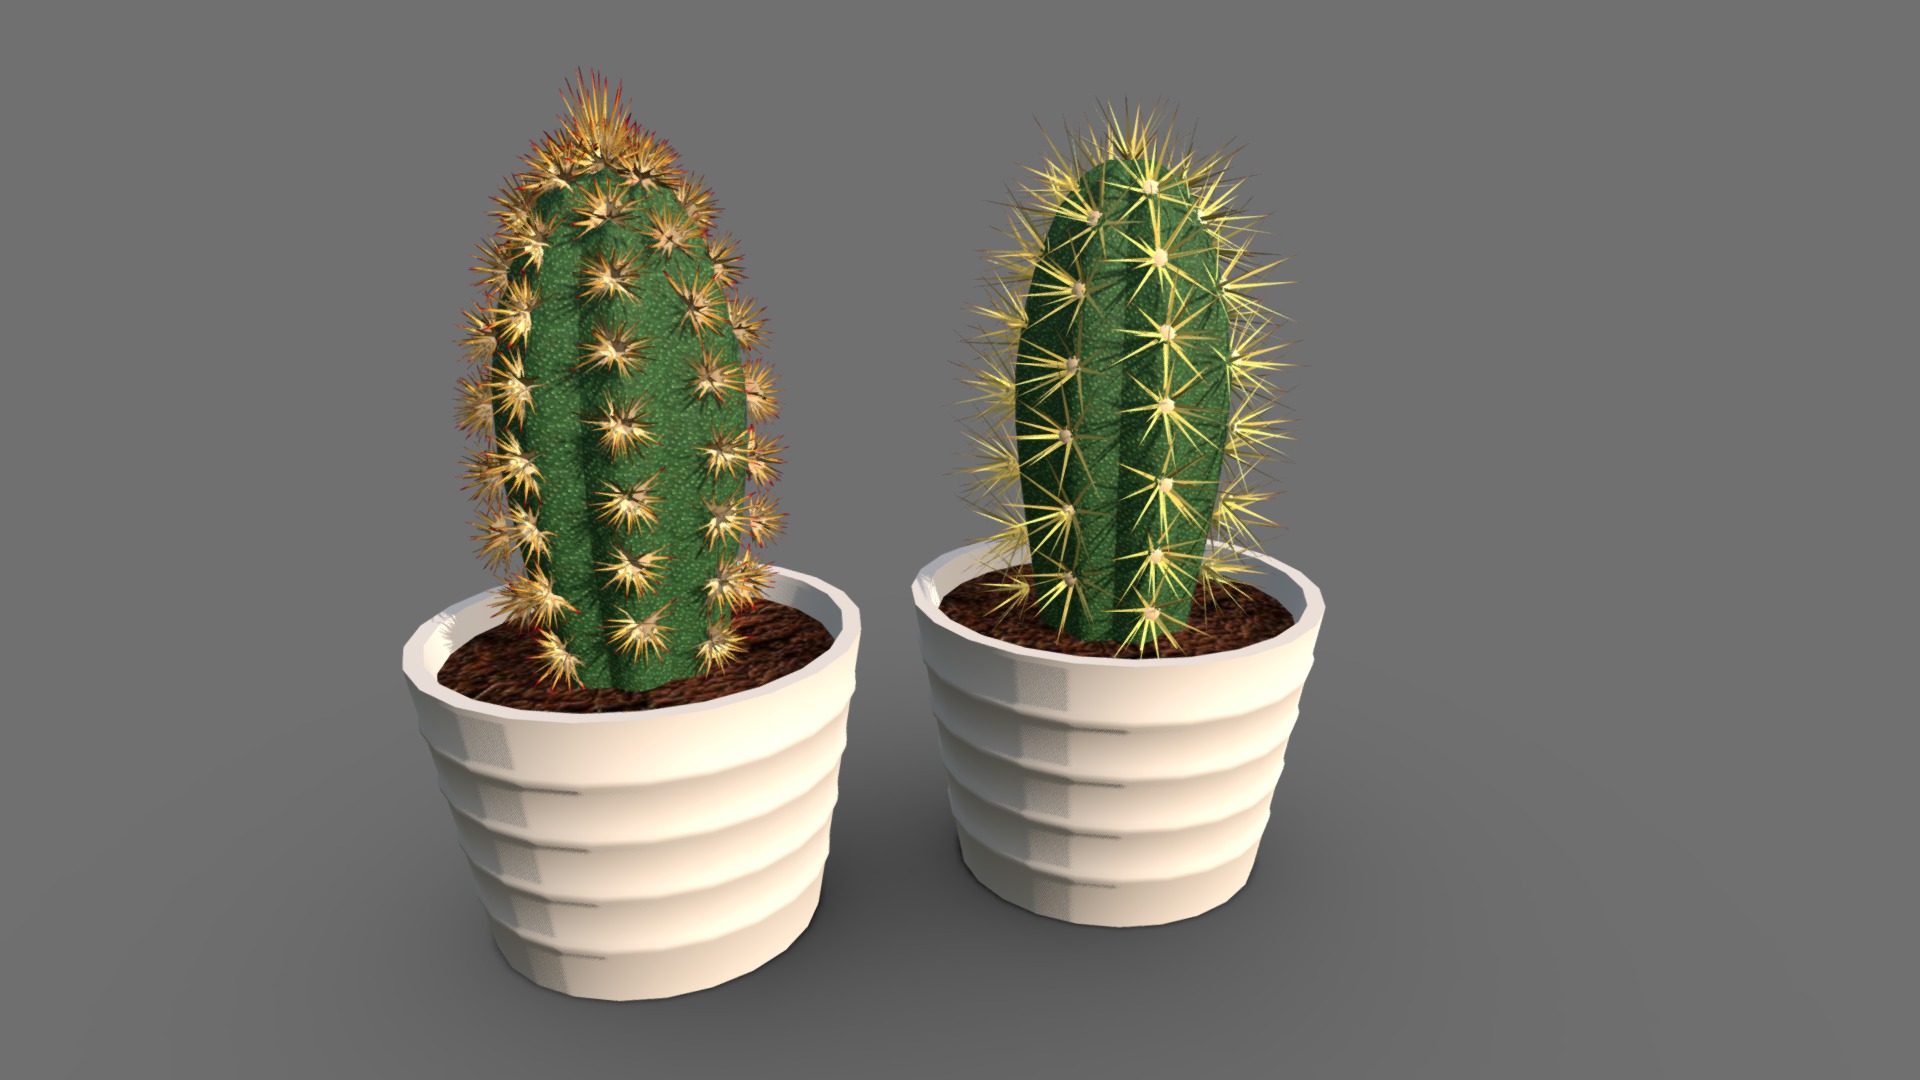 3D model Cactus - This is a 3D model of the Cactus. The 3D model is about two cactus in white pots.